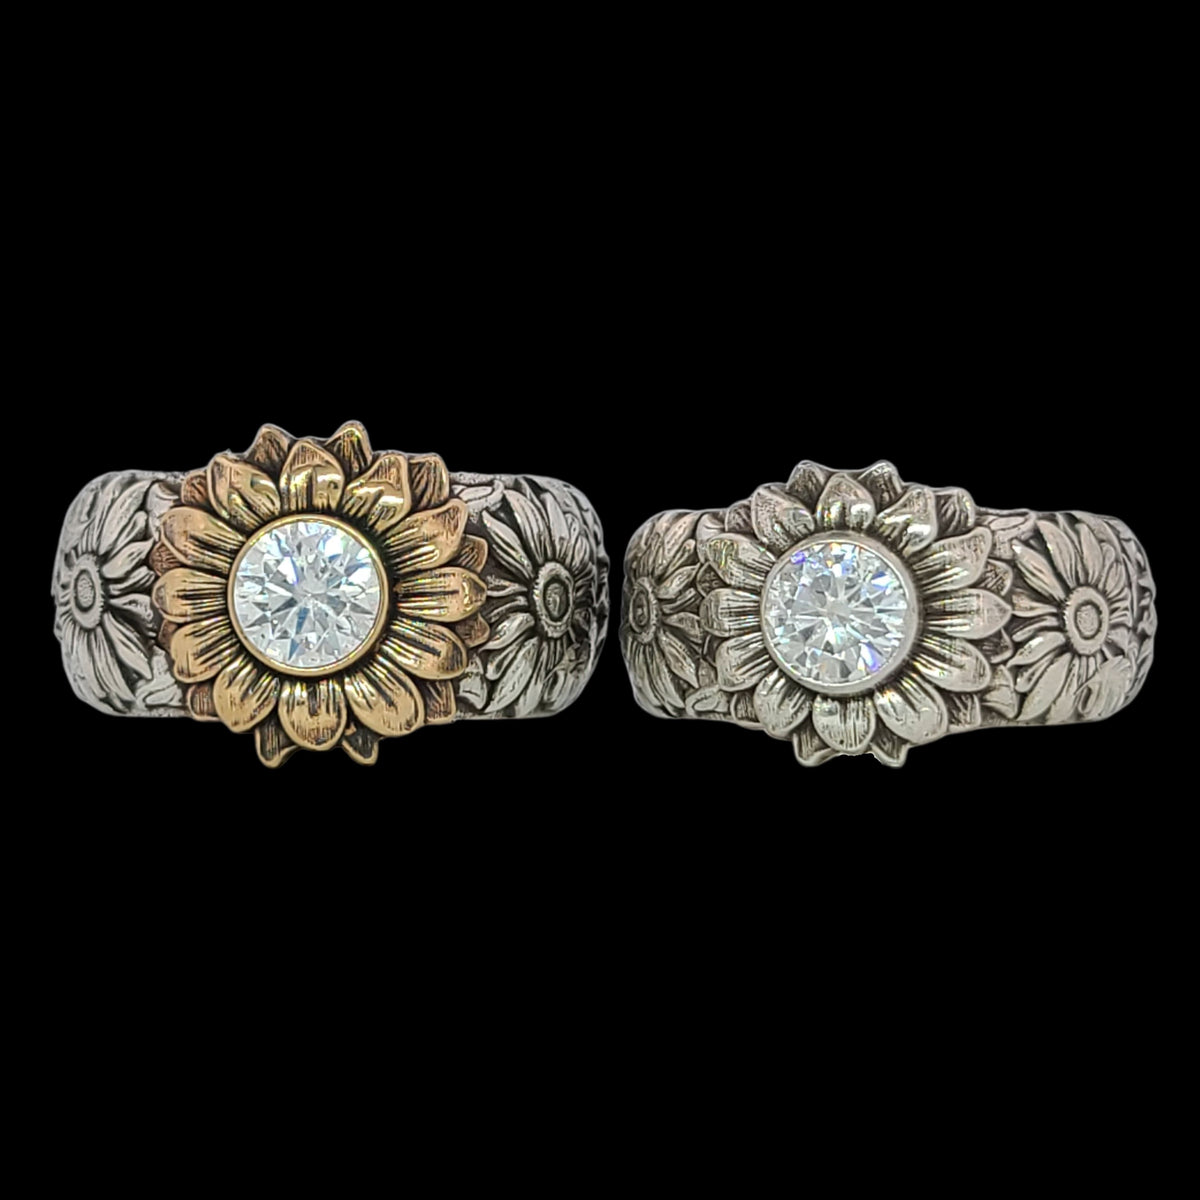 SUNFLOWER SOLITAIRE Ring in GOLD with CHOICE of 5mm GEMSTONE - Starting at $1089